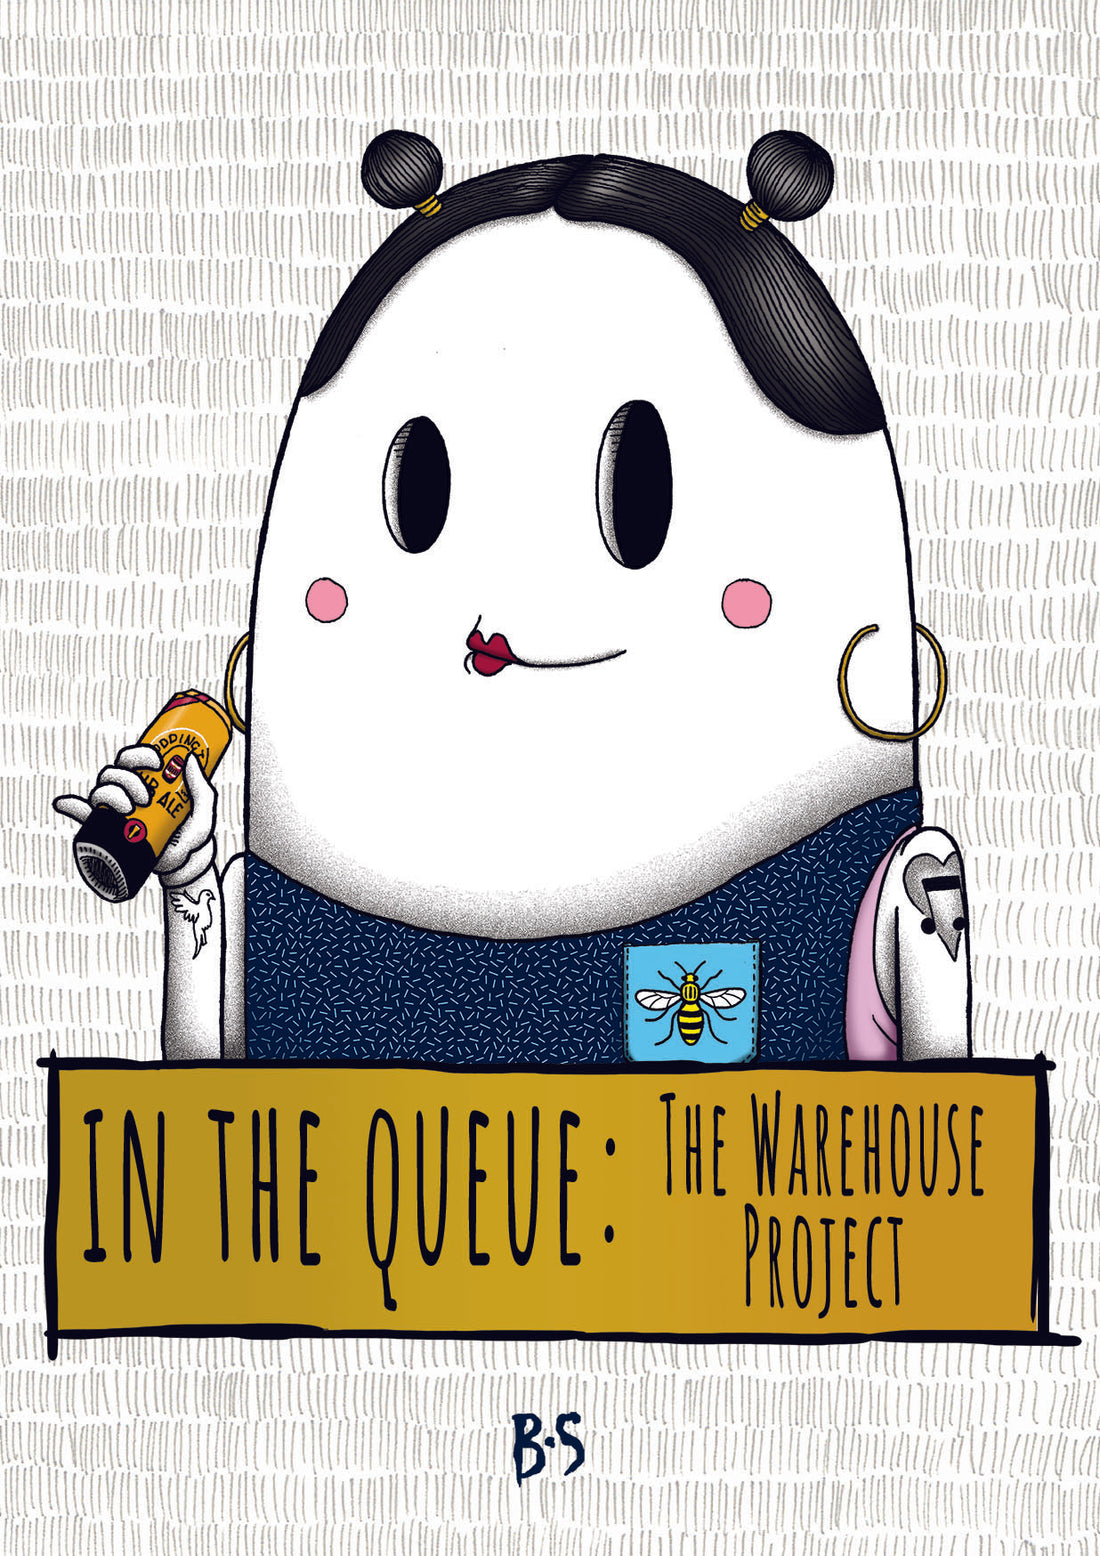 In The Queue: Warehouse Project